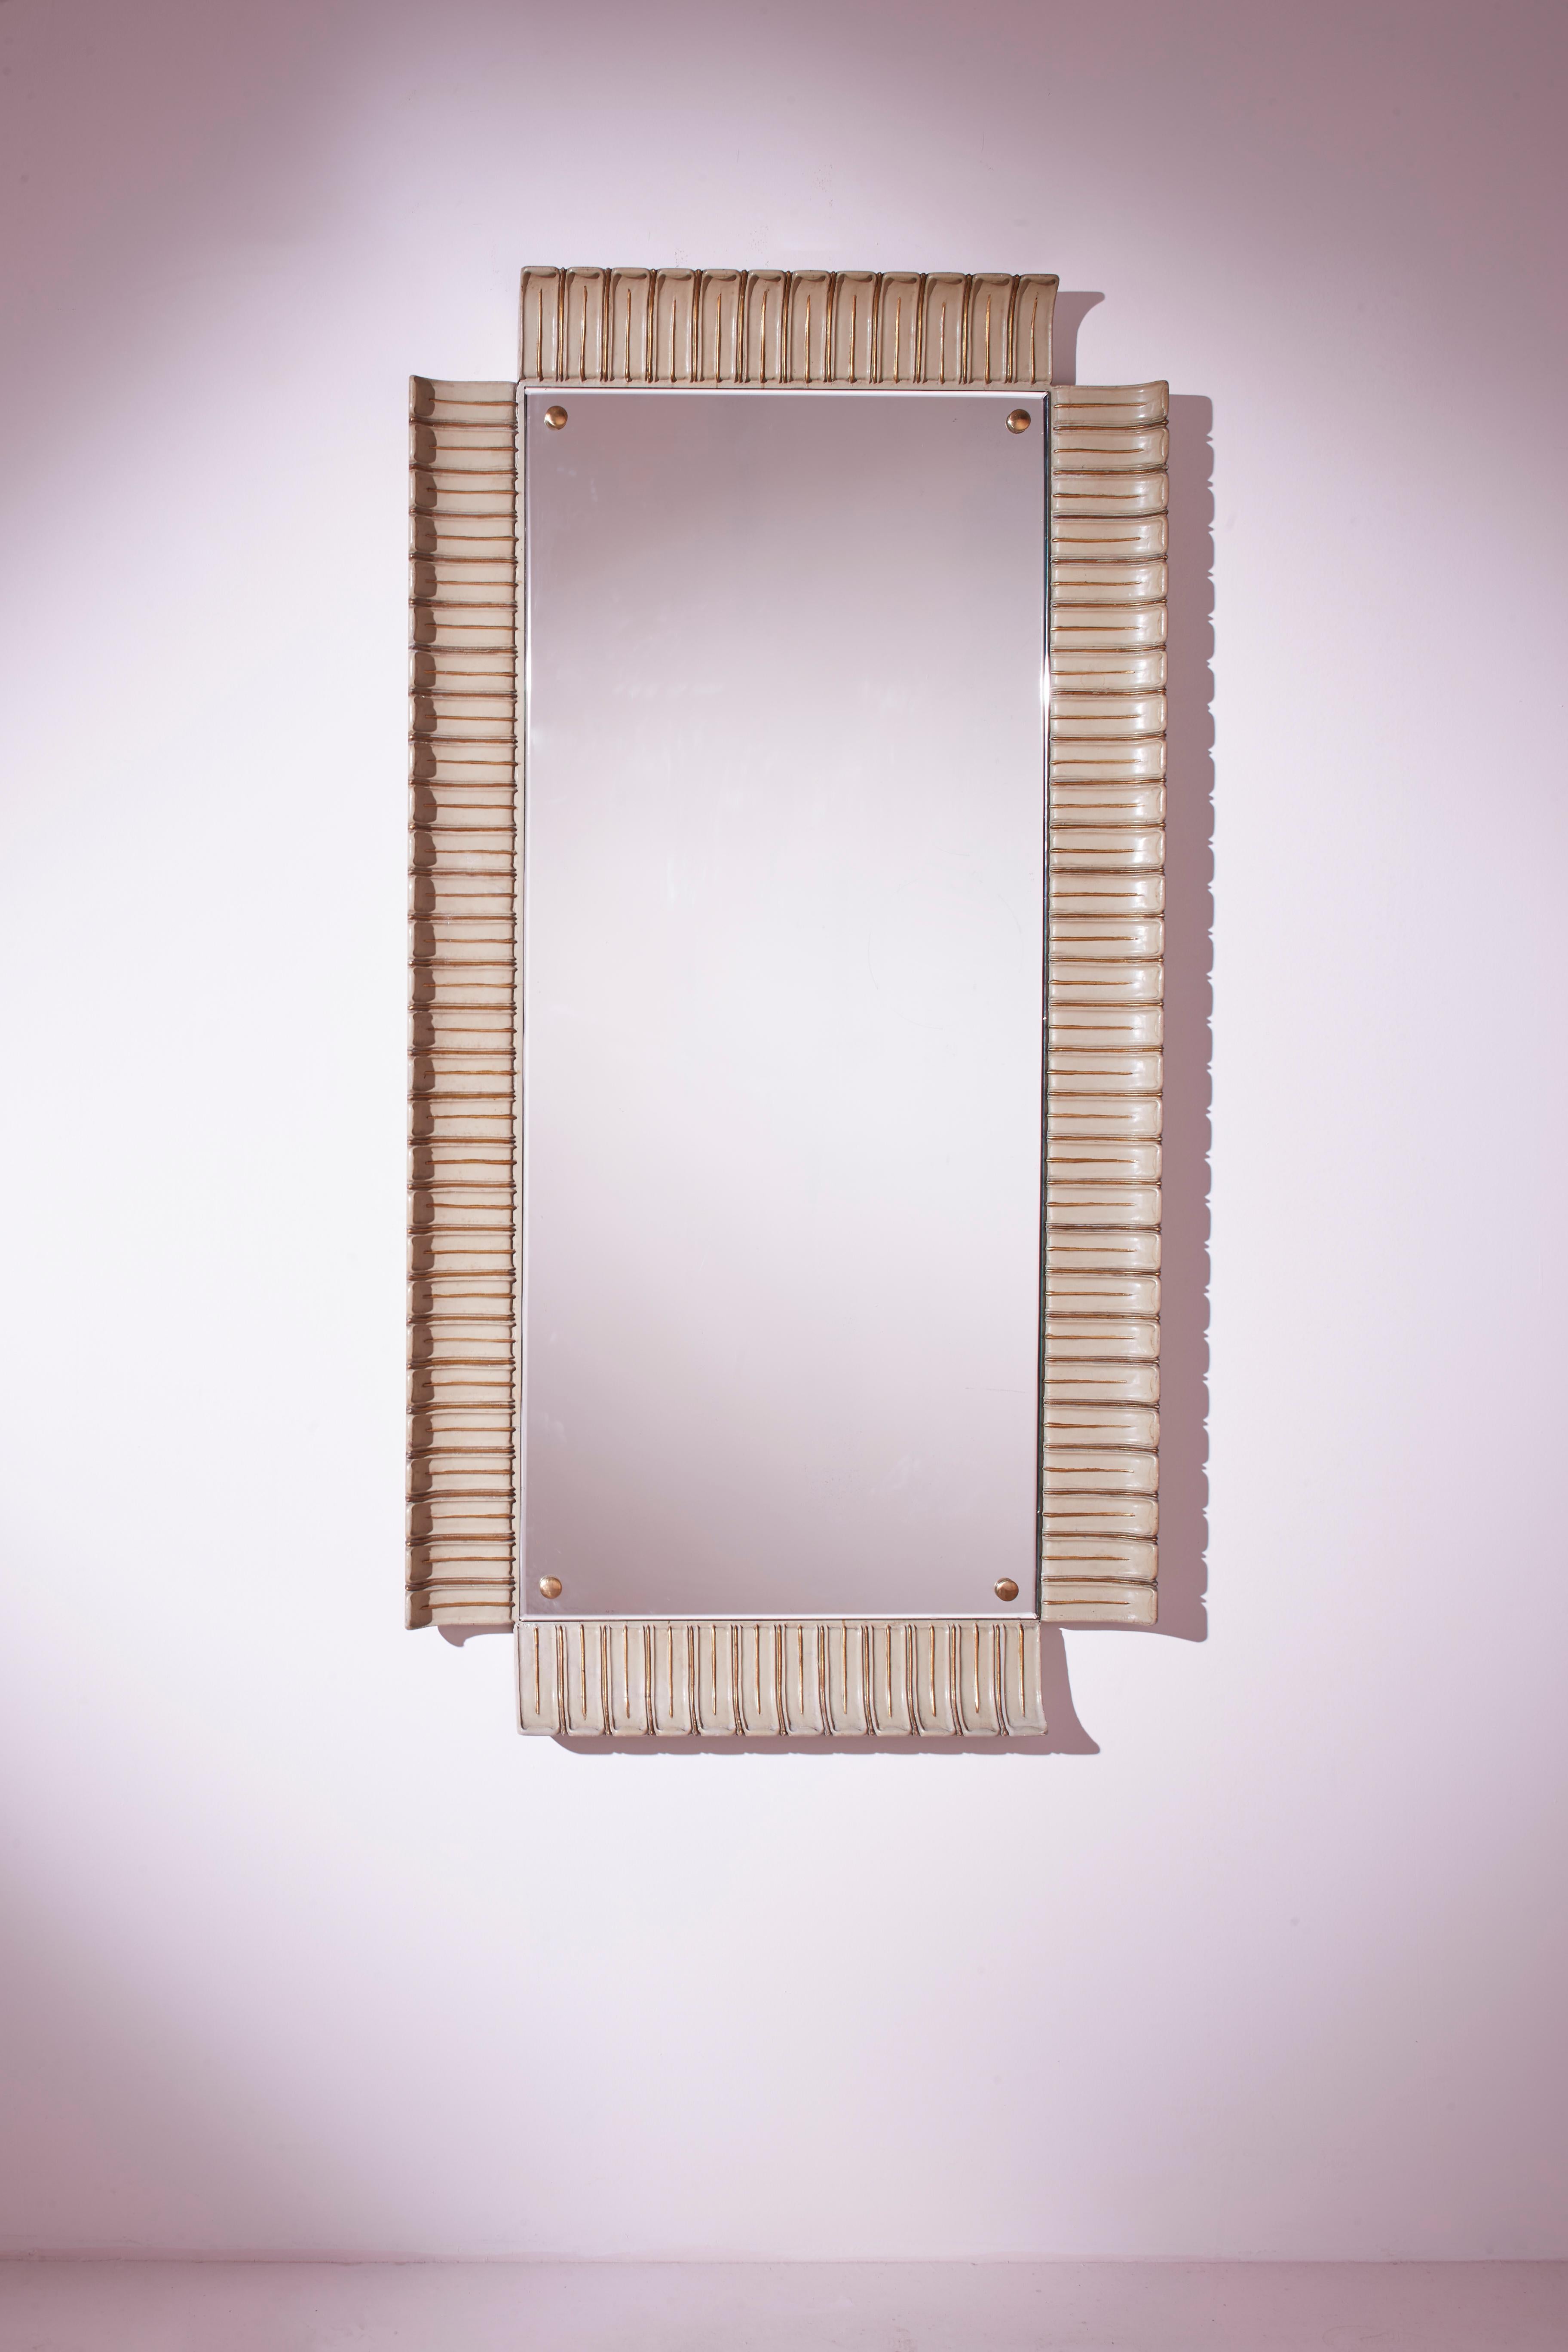 A rare and spectacular rectangular mirror with lacquered and gilded frame. Italian craftsmanship from the 1940s, designed by Paolo Buffa.

A large full-length mirror composed of an original glass from the 1940s, enhanced by a significant carved